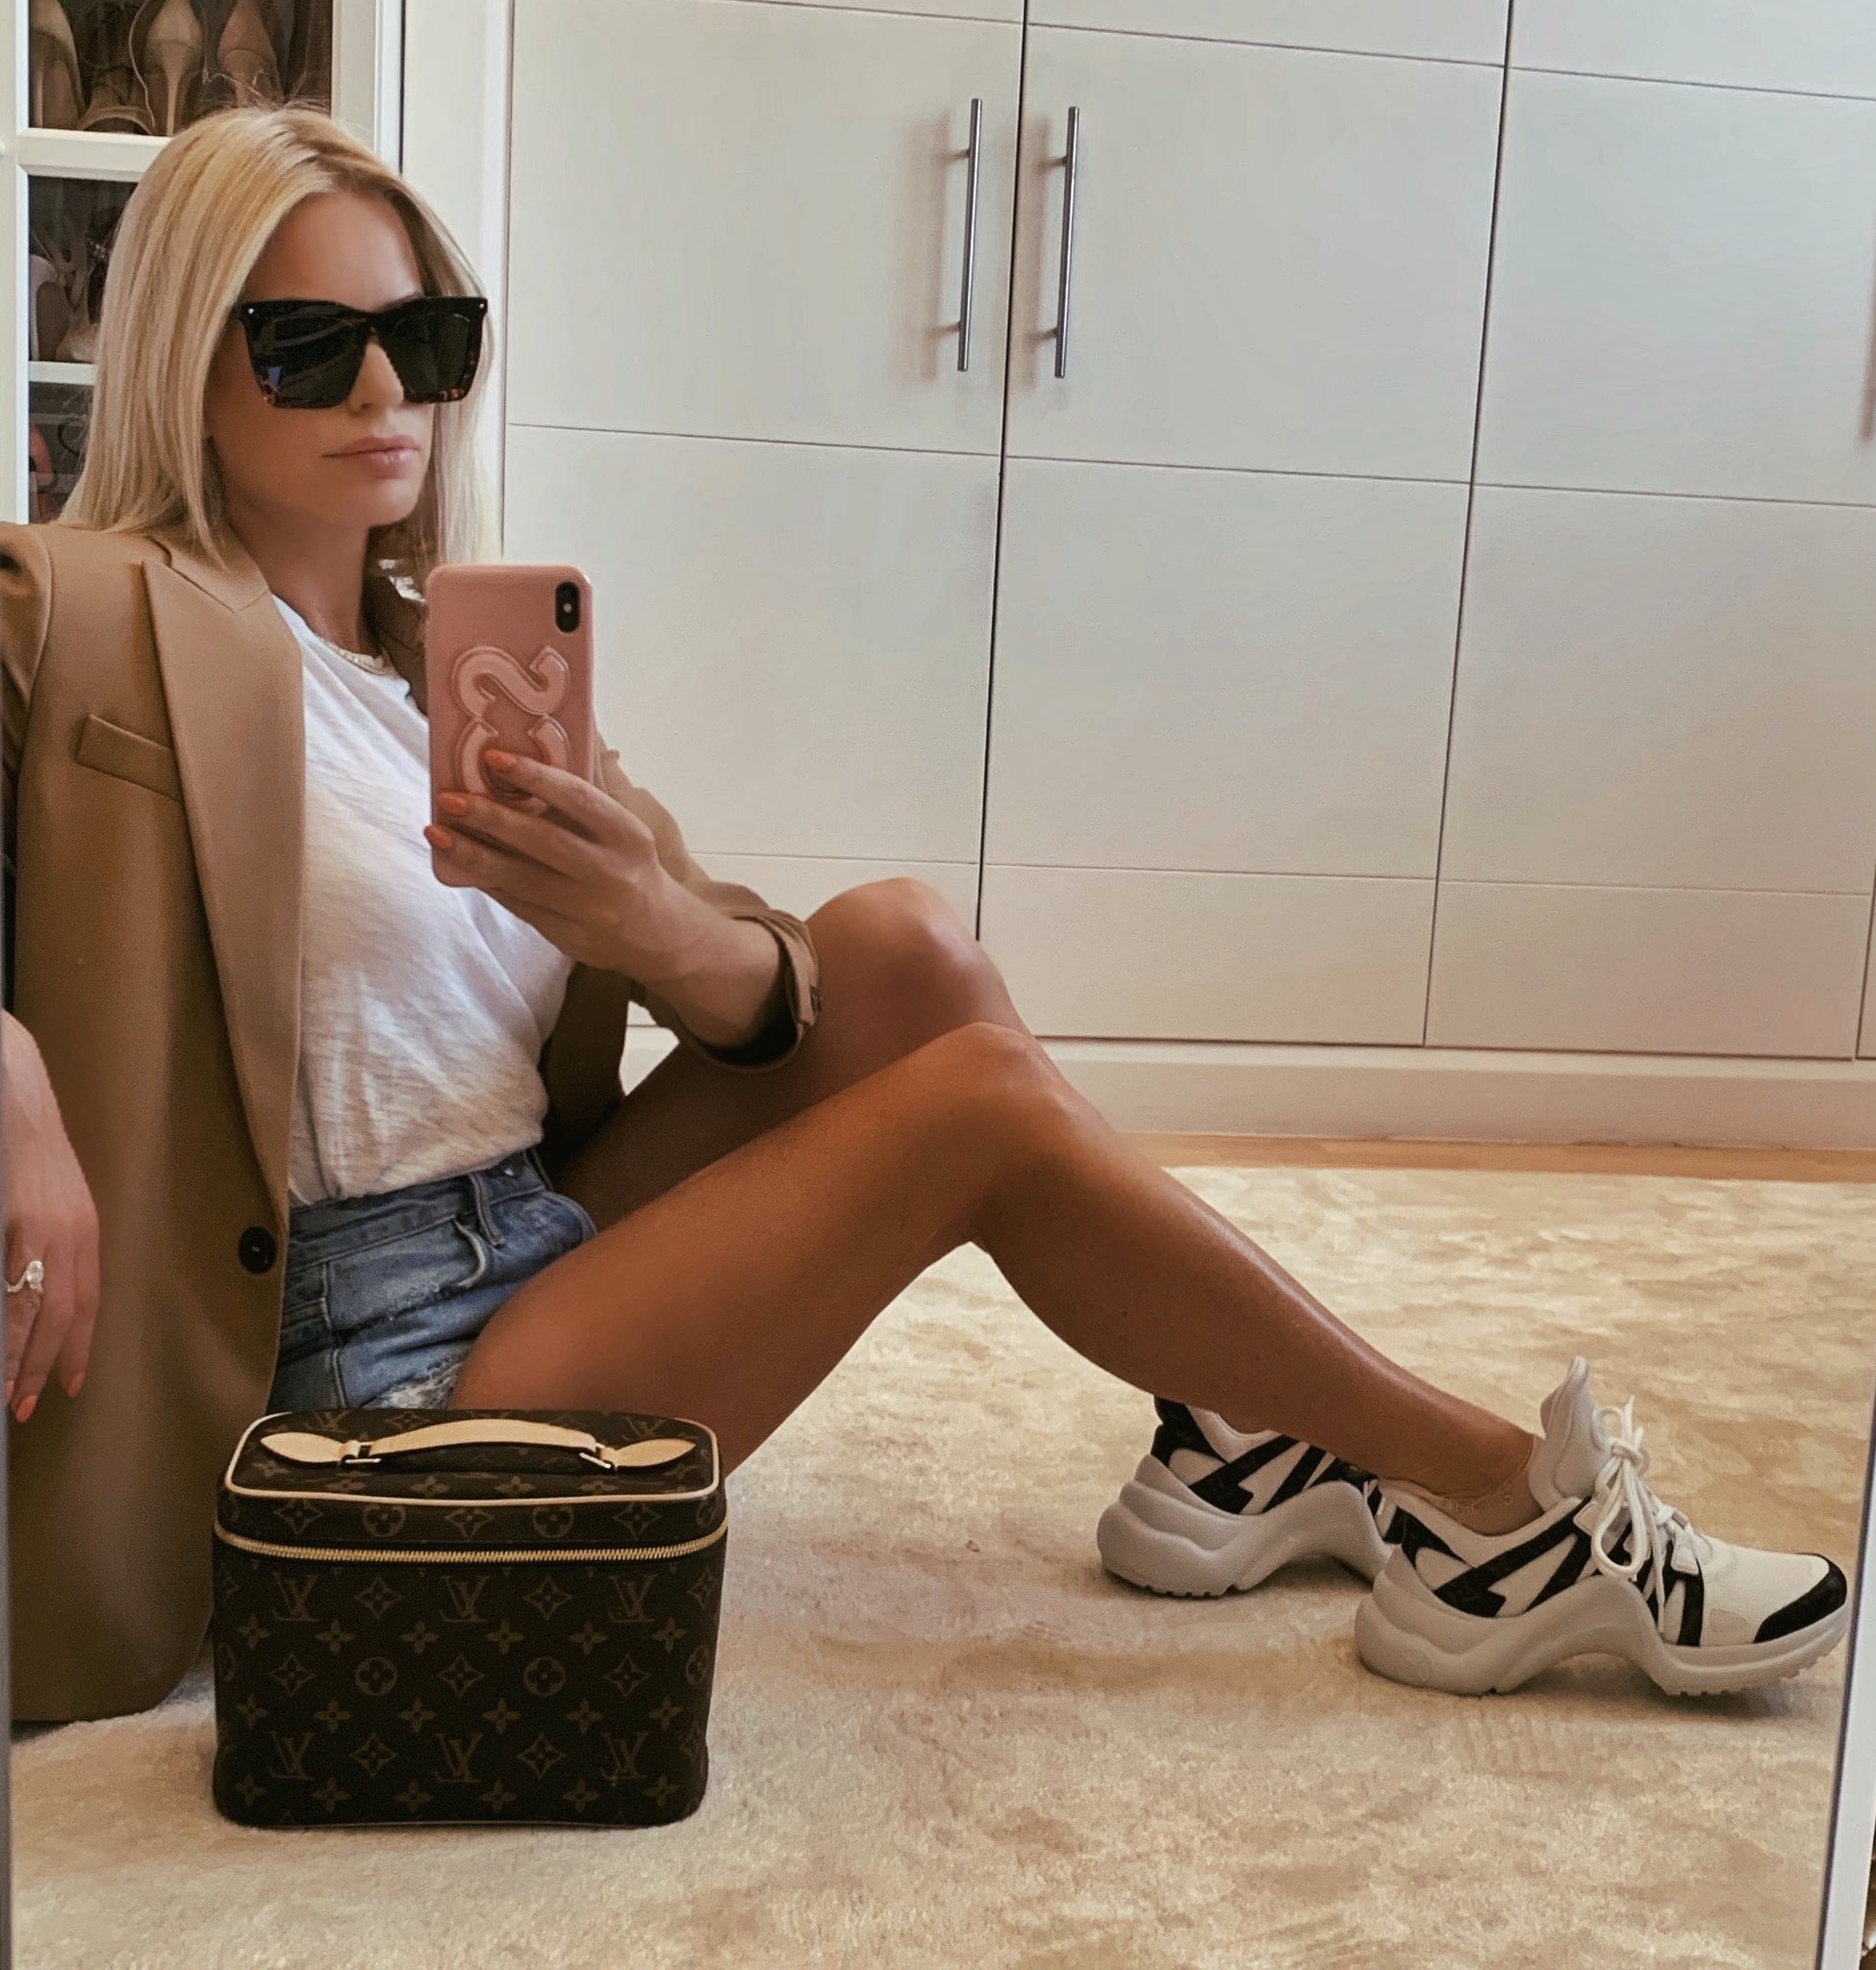 Caroline Stanbury on X: Bad vibes don't go with my outfit ✌🏼 #ootd  #simplicityiskey  / X